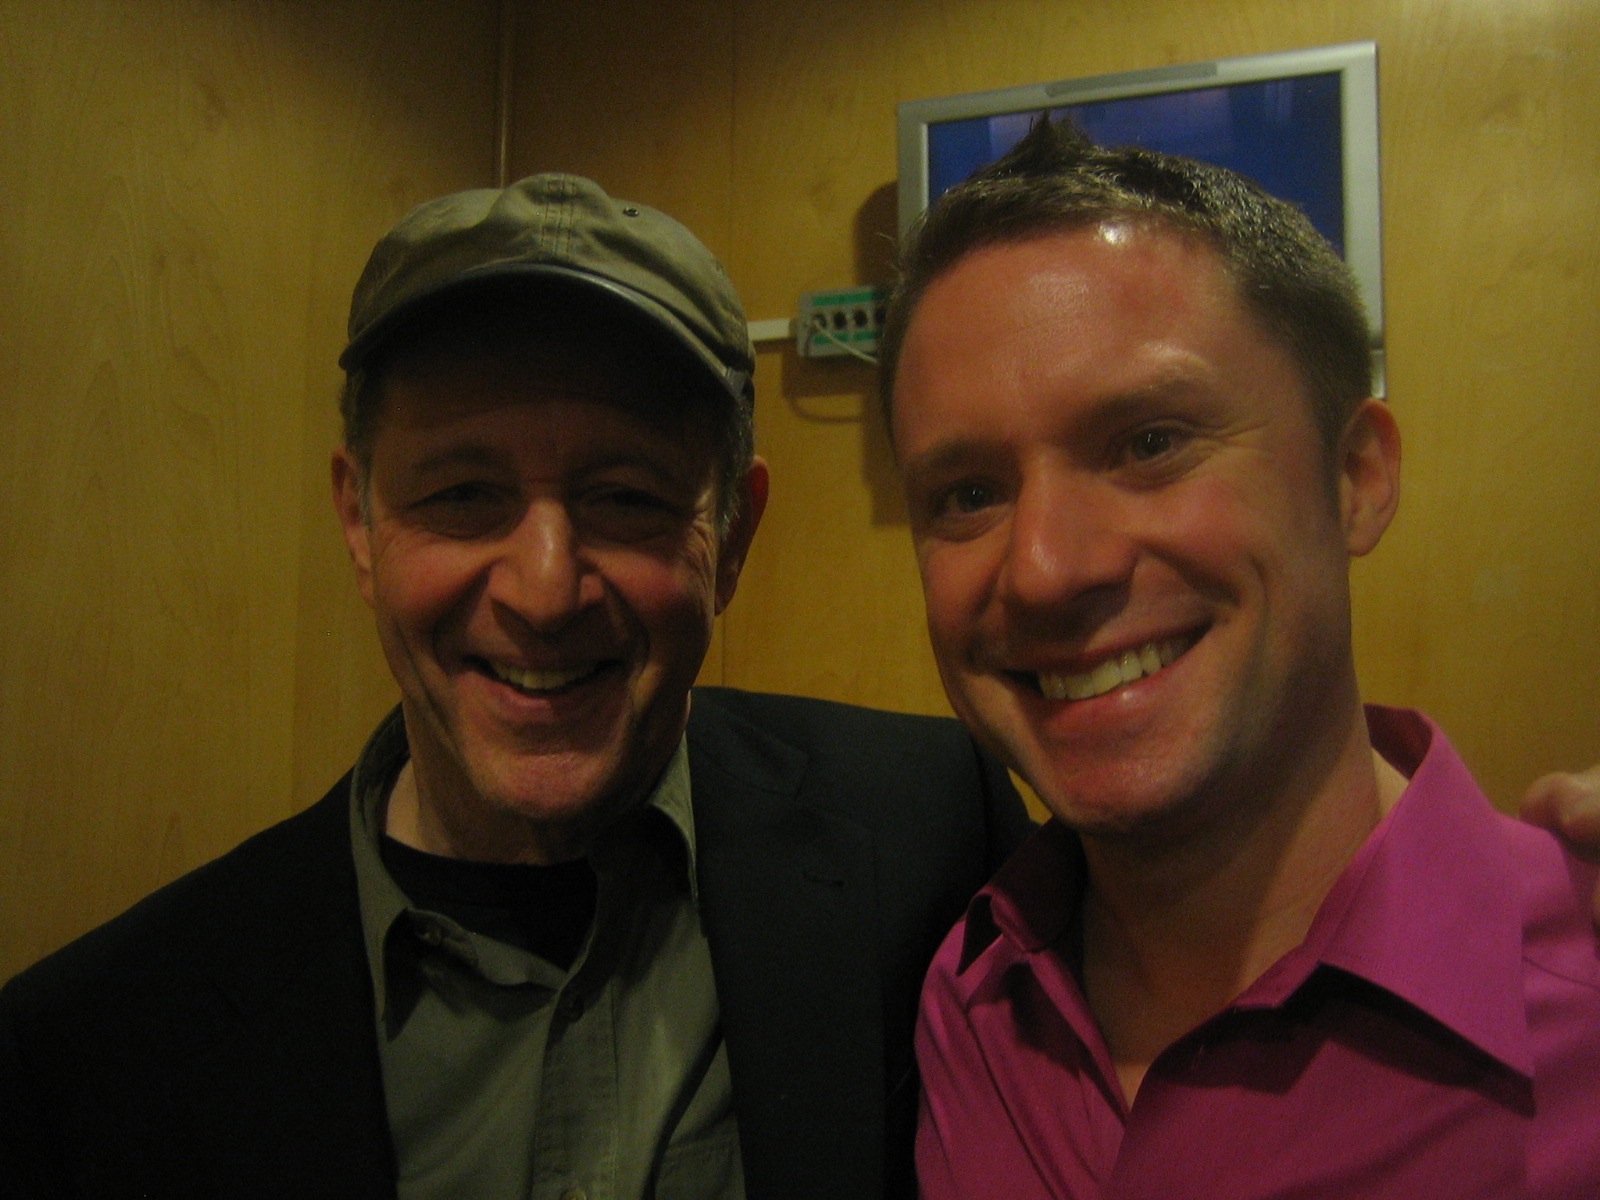 With Steve Reich at London’s South Bank Centre in February 2010, on the first occasion we were to meet.